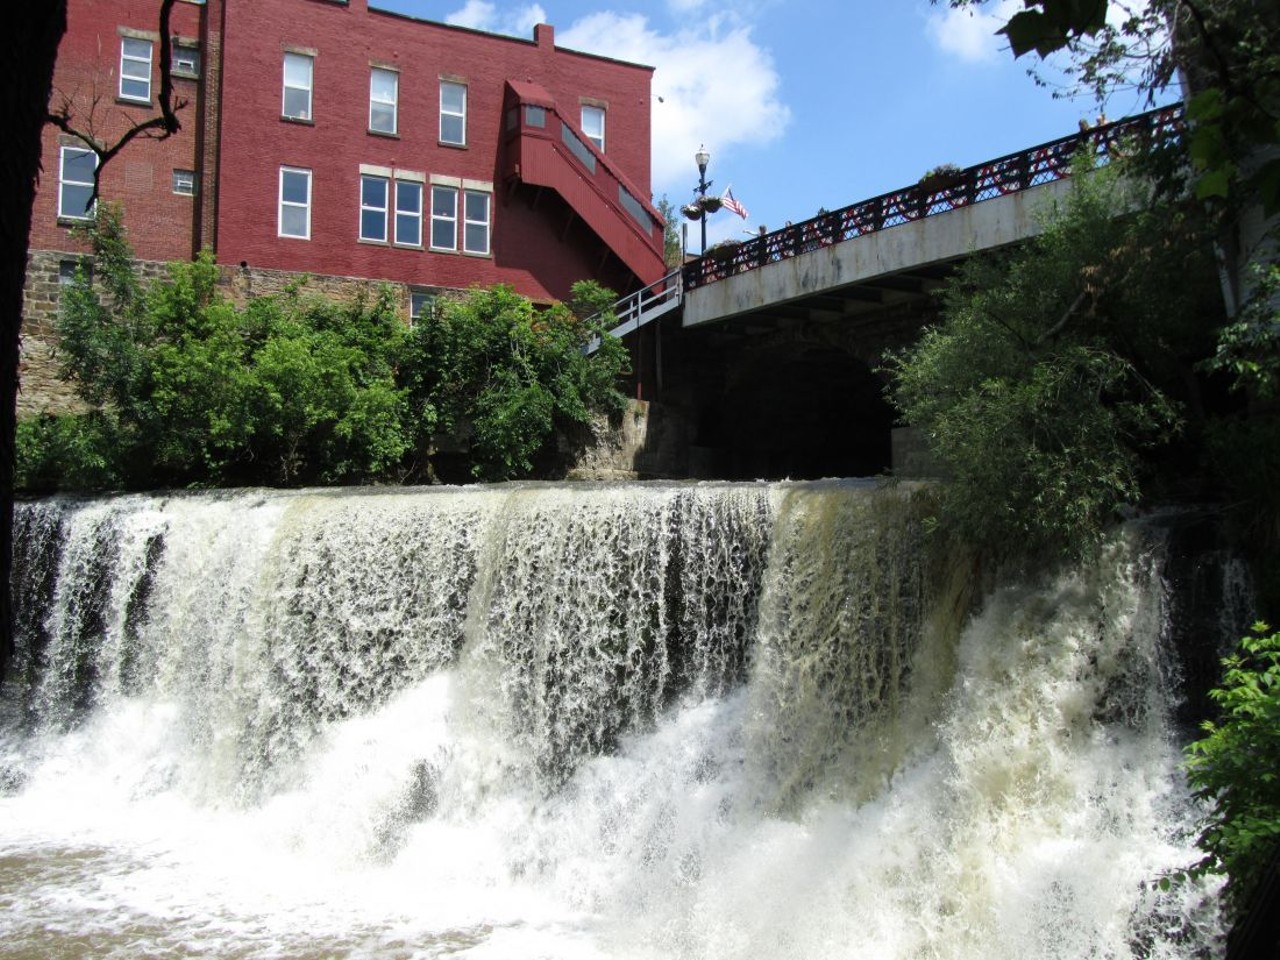  Chagrin Falls Falls
Yes. Chagrin Falls is known for its quaint downtown. But the actual waterfalls are loud as hell and the perfect place to scream into the void.